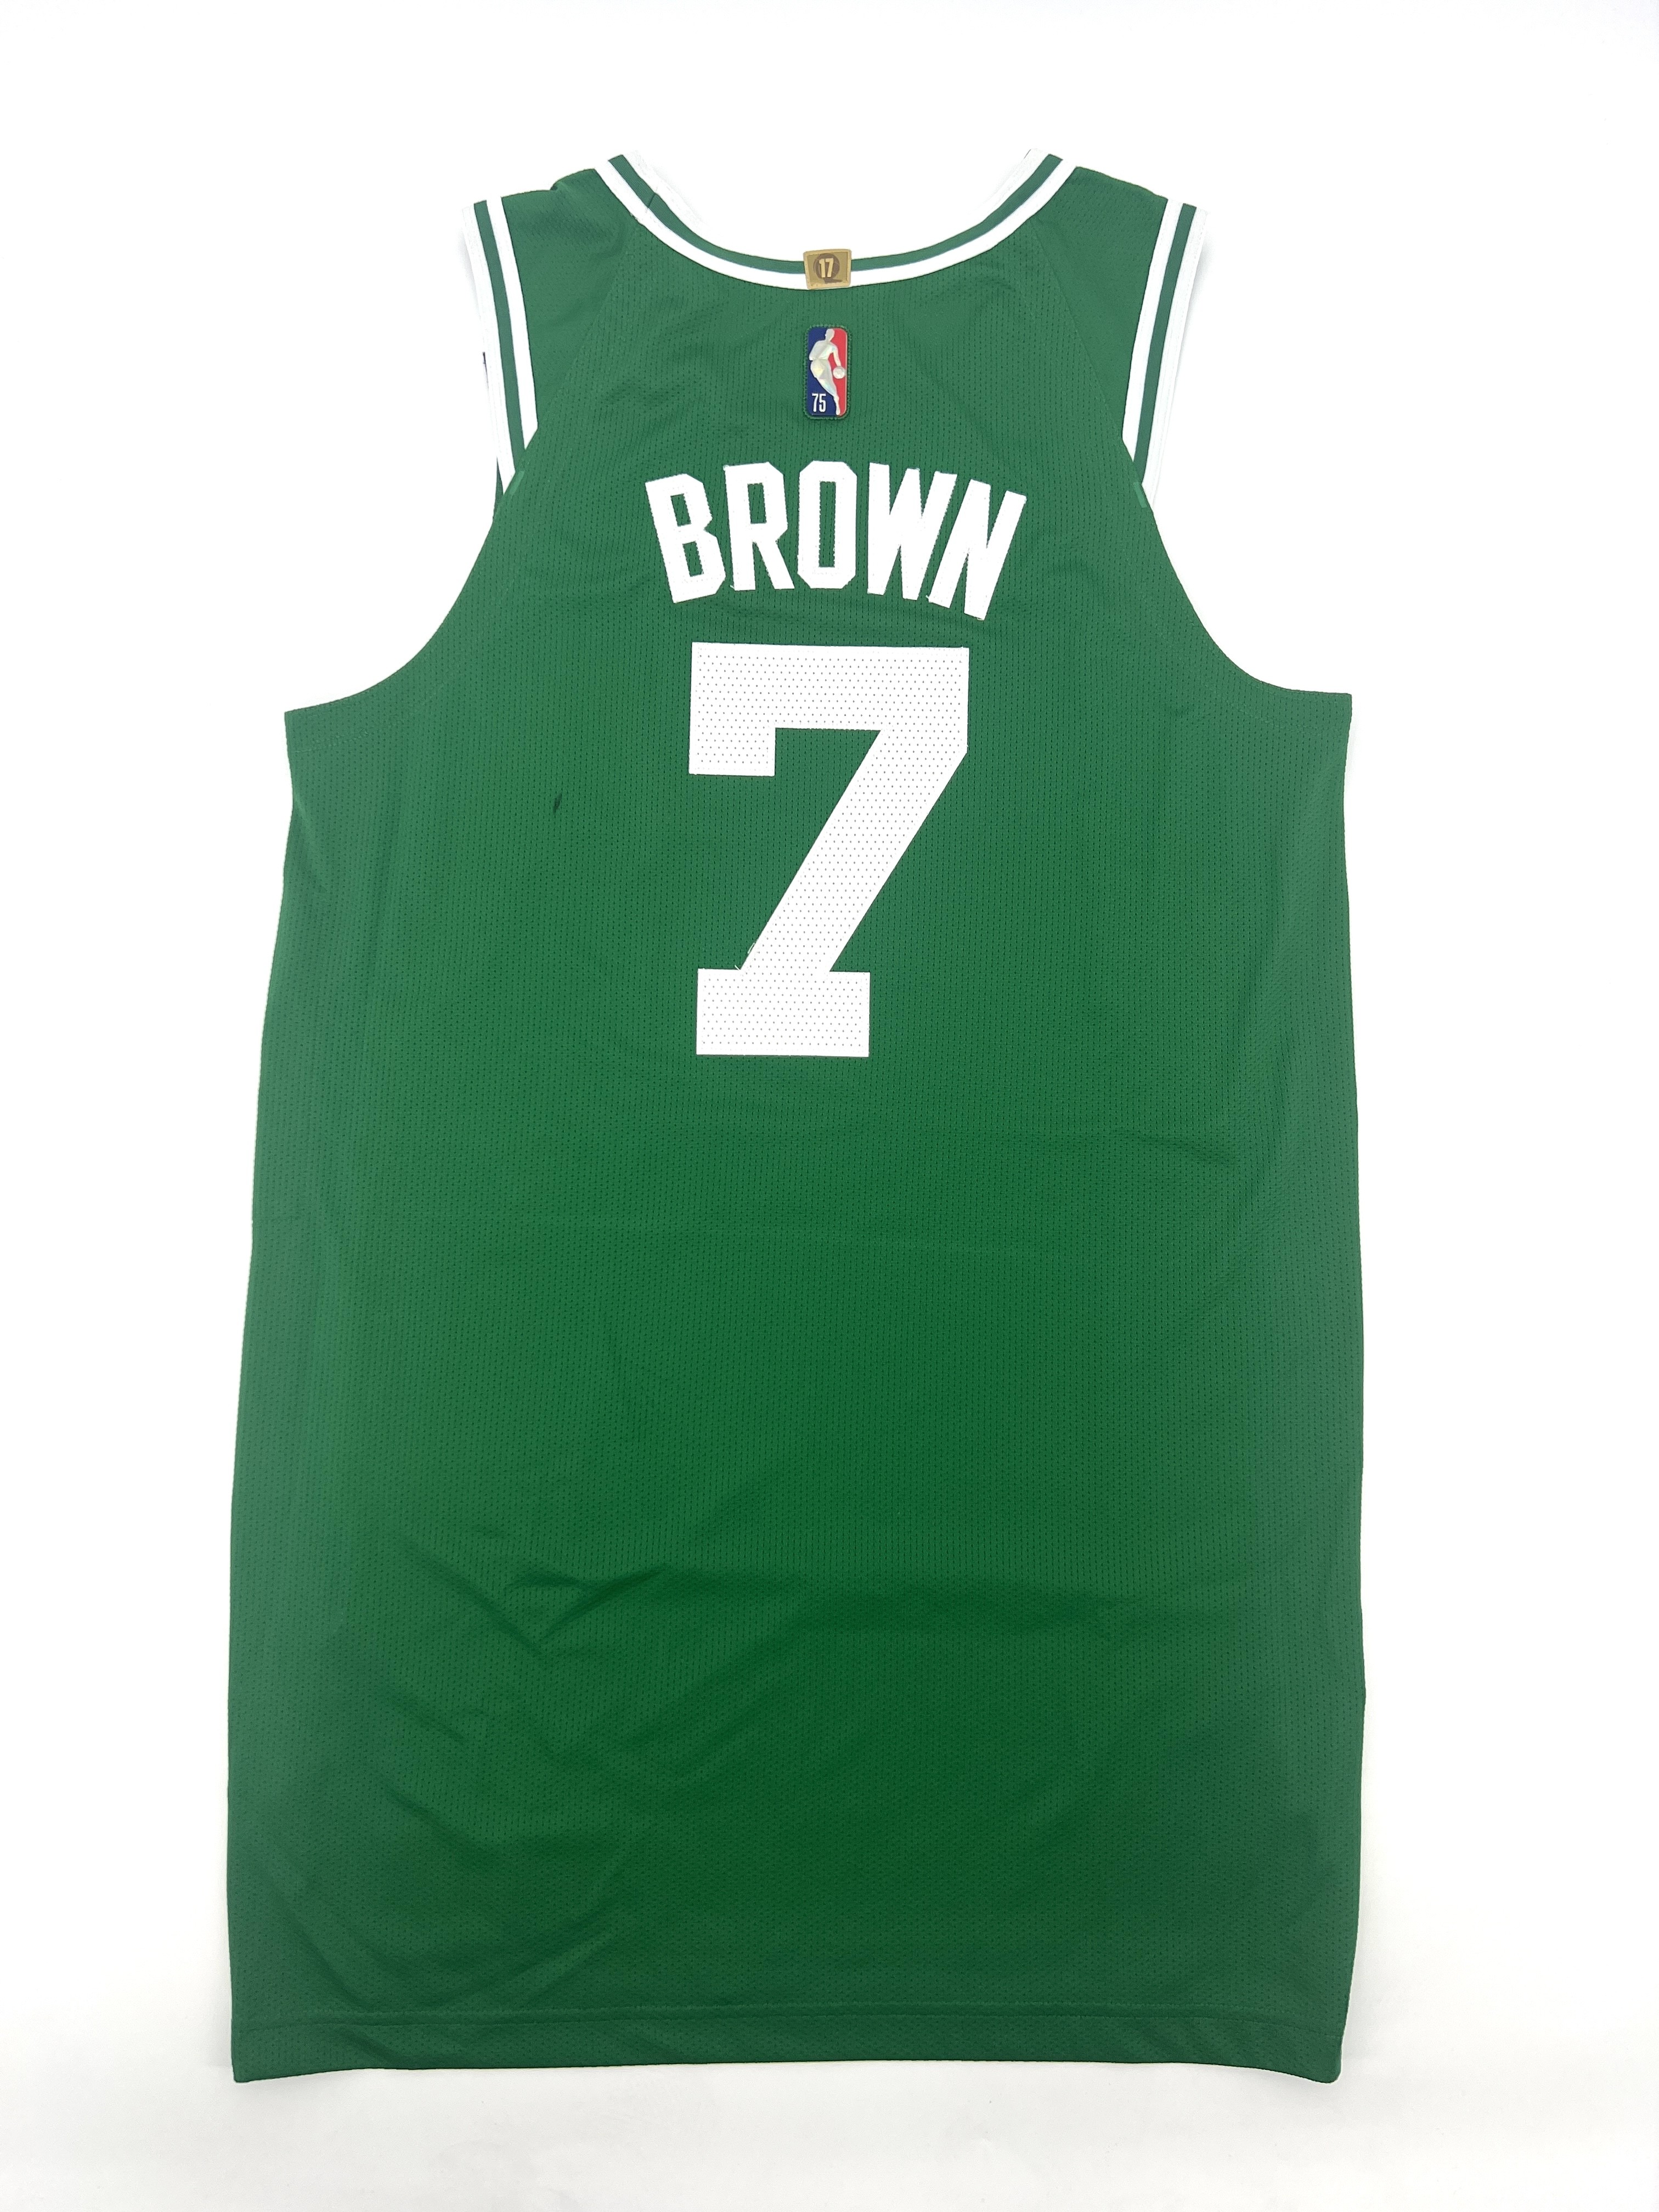 Jaylen Brown Game Issued UCLA Basketball Jersey Specifically Made For Player